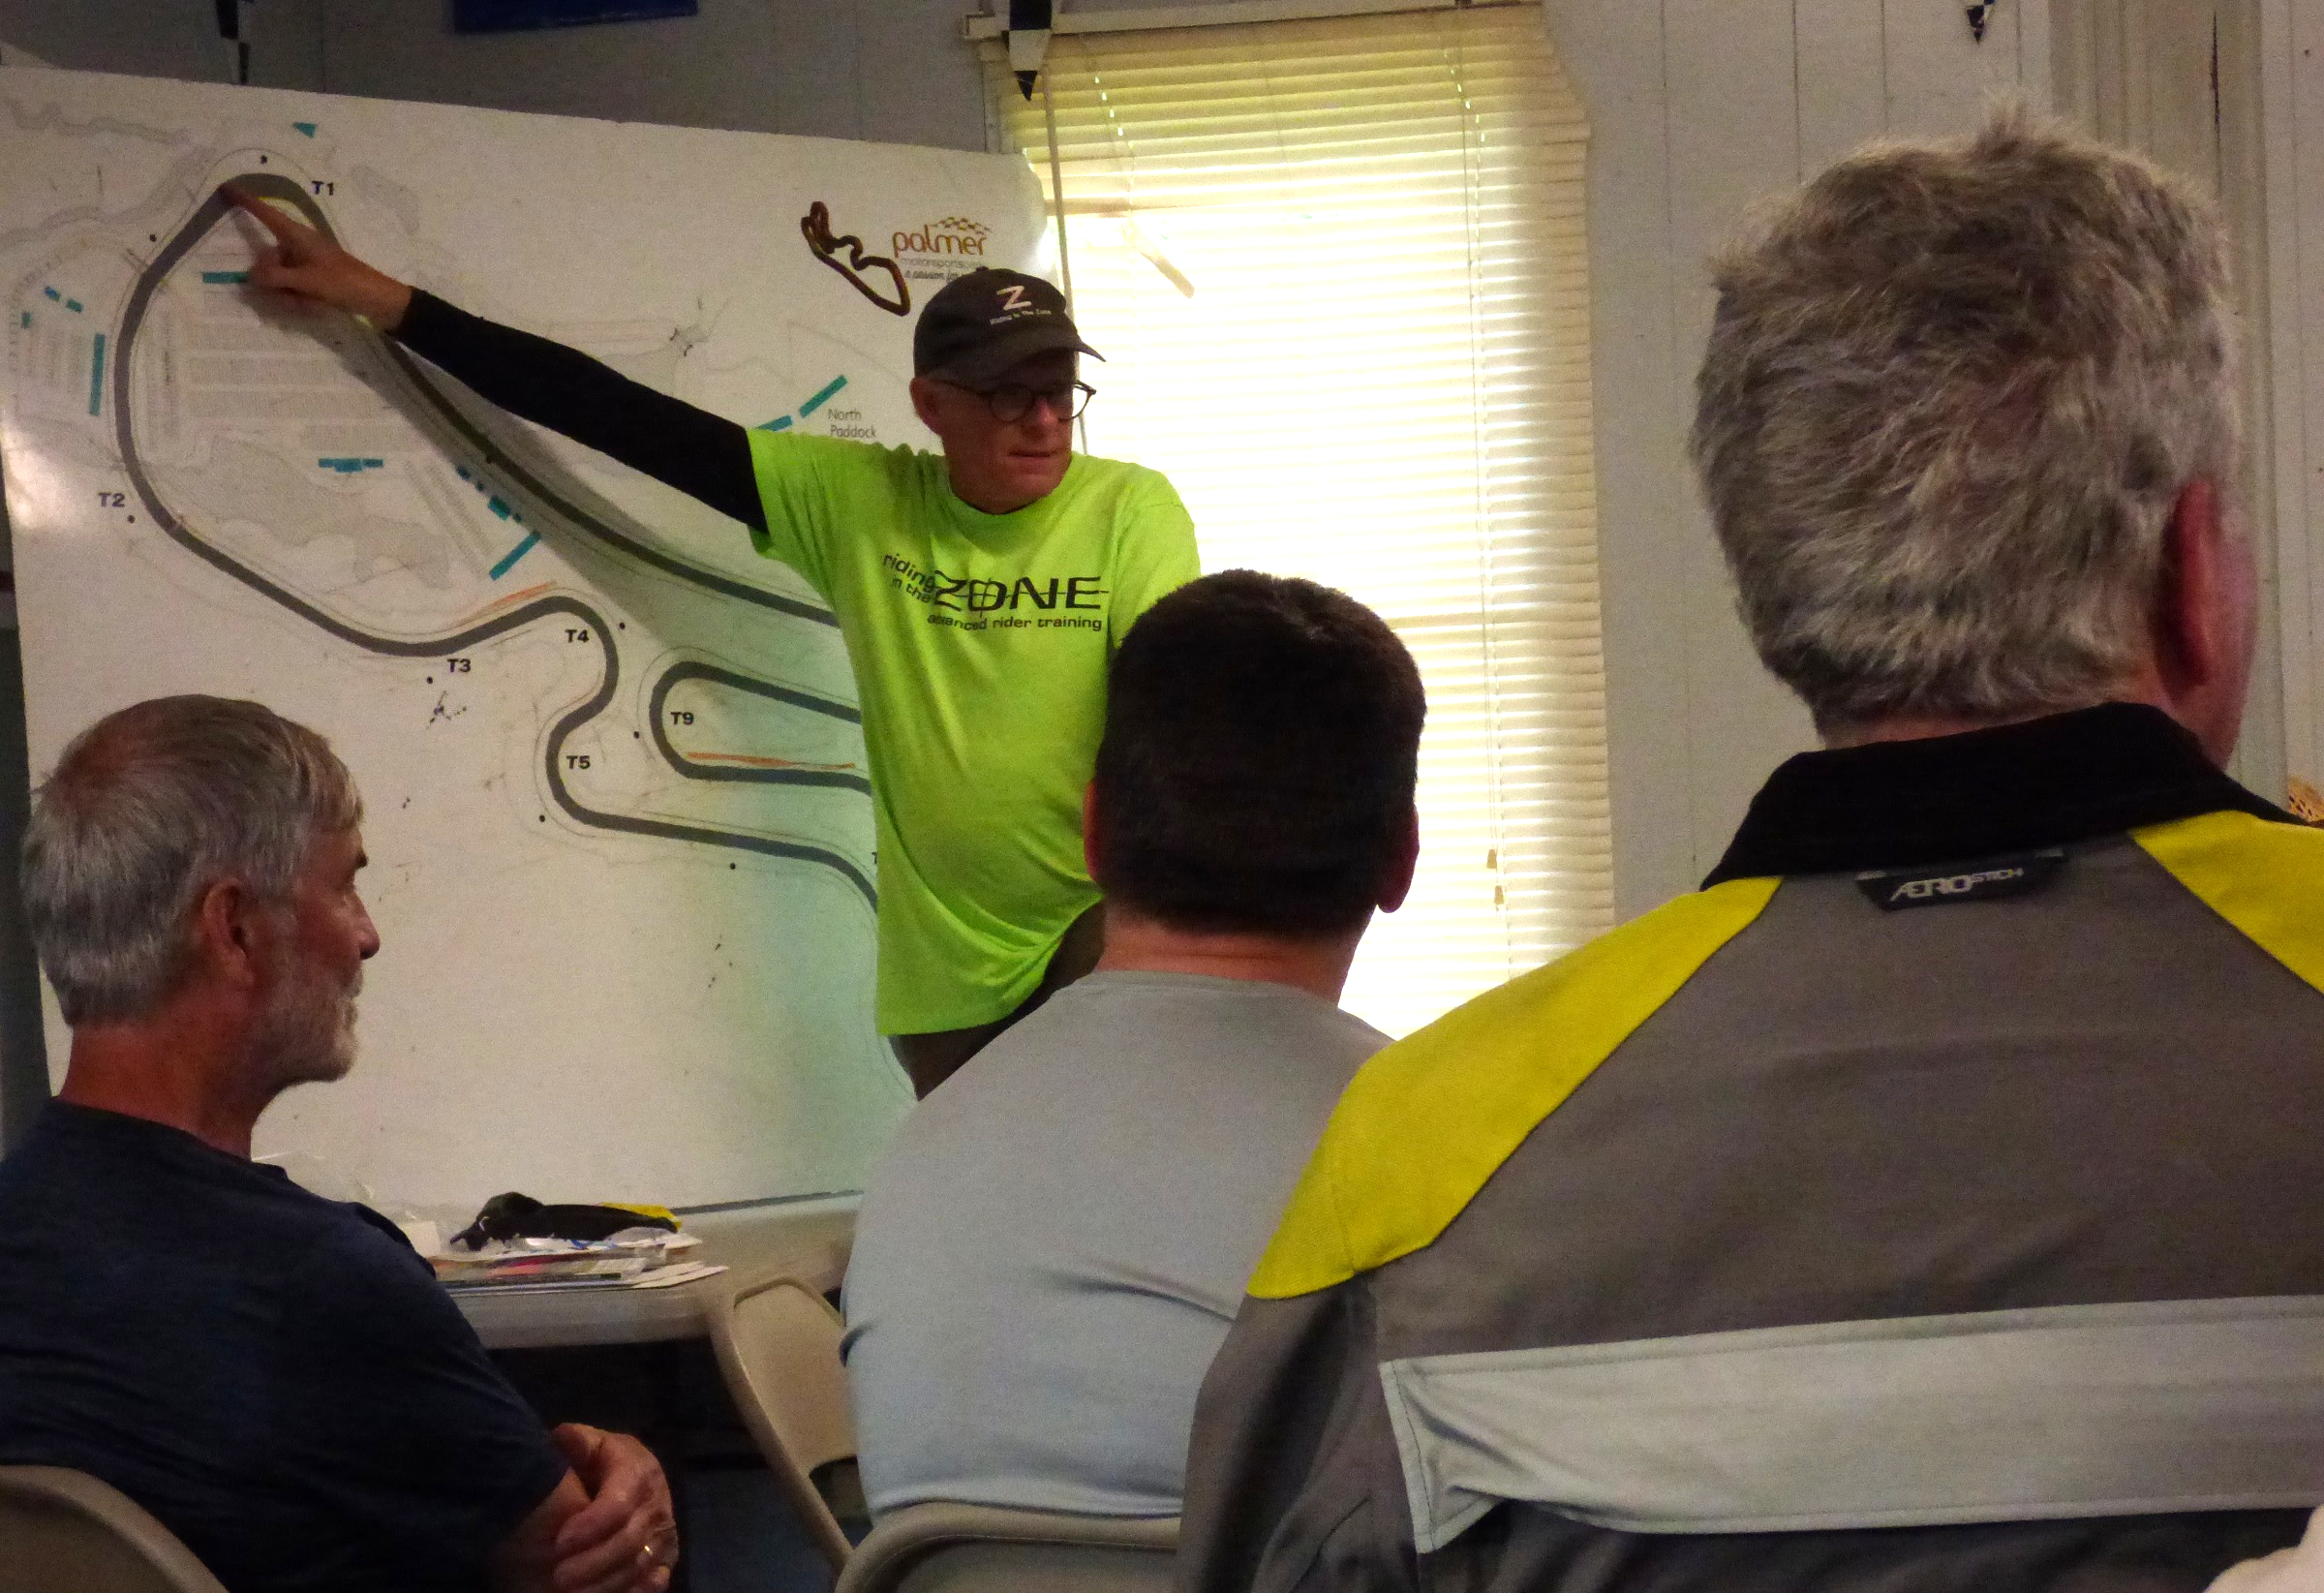 Ken Condon explains a point at the whiteboard